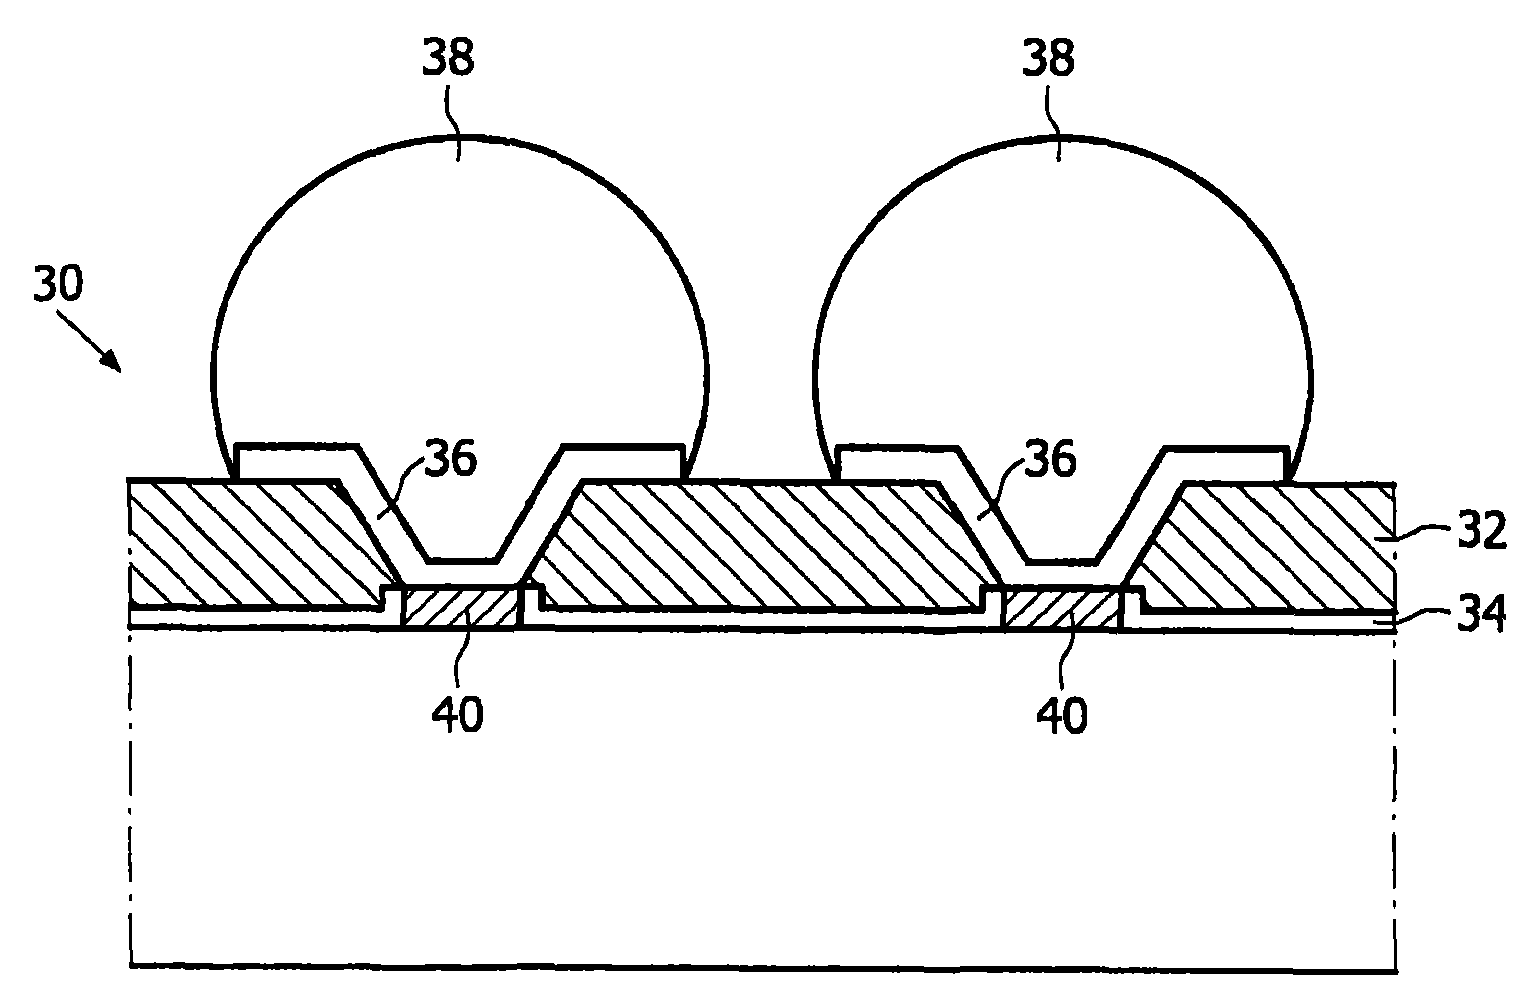 Stress buffering package for a semiconductor component